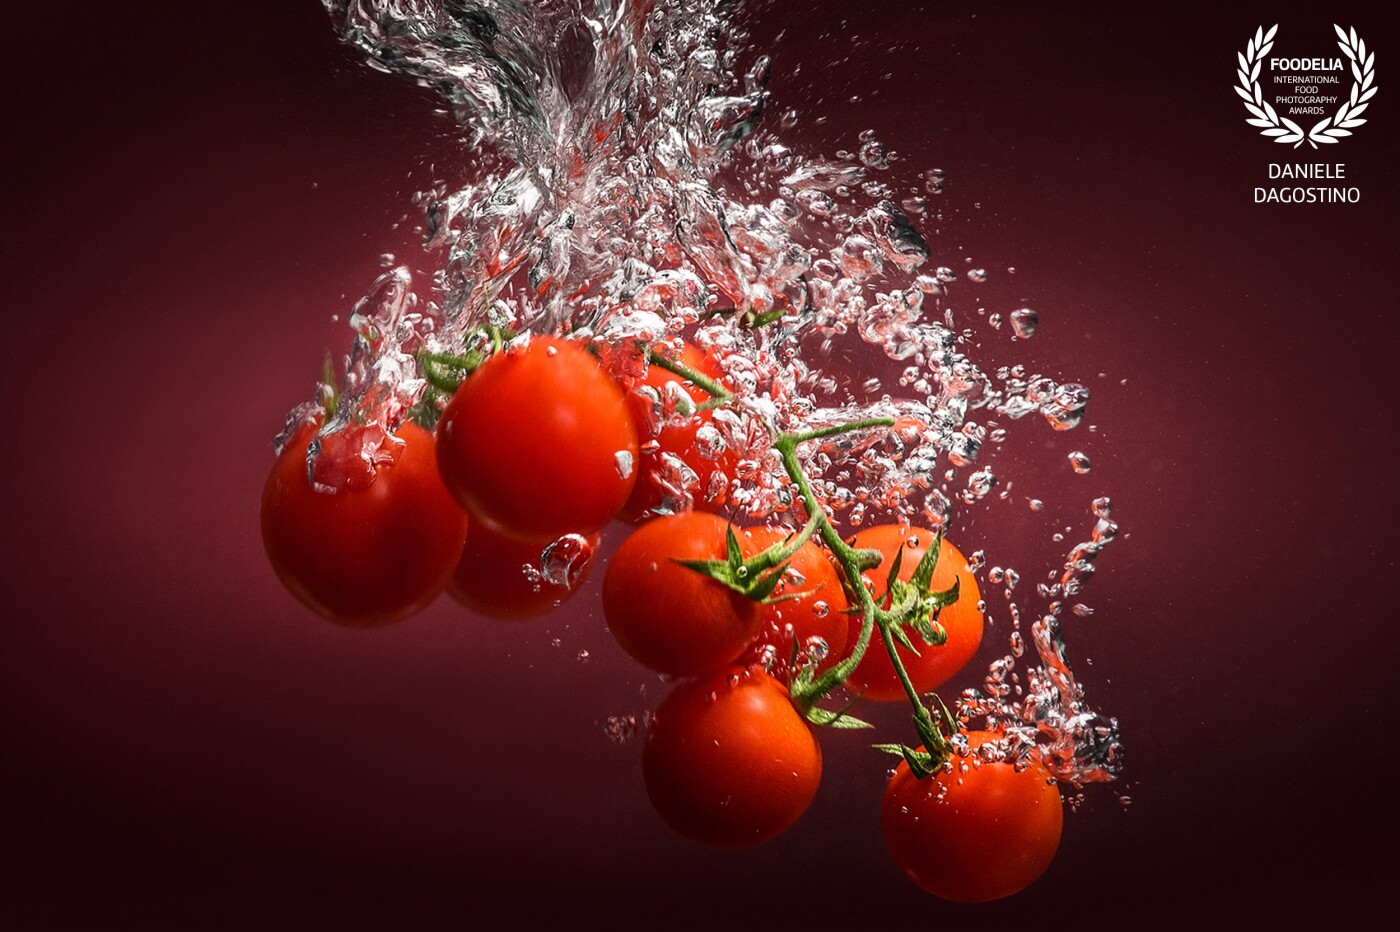 Dip in water while washing tomato in the process for Italian tomato sauce, one of the most important ingredients in the italian kitchen.<br />
Shoot with nikon D850 and 2 light strobos.